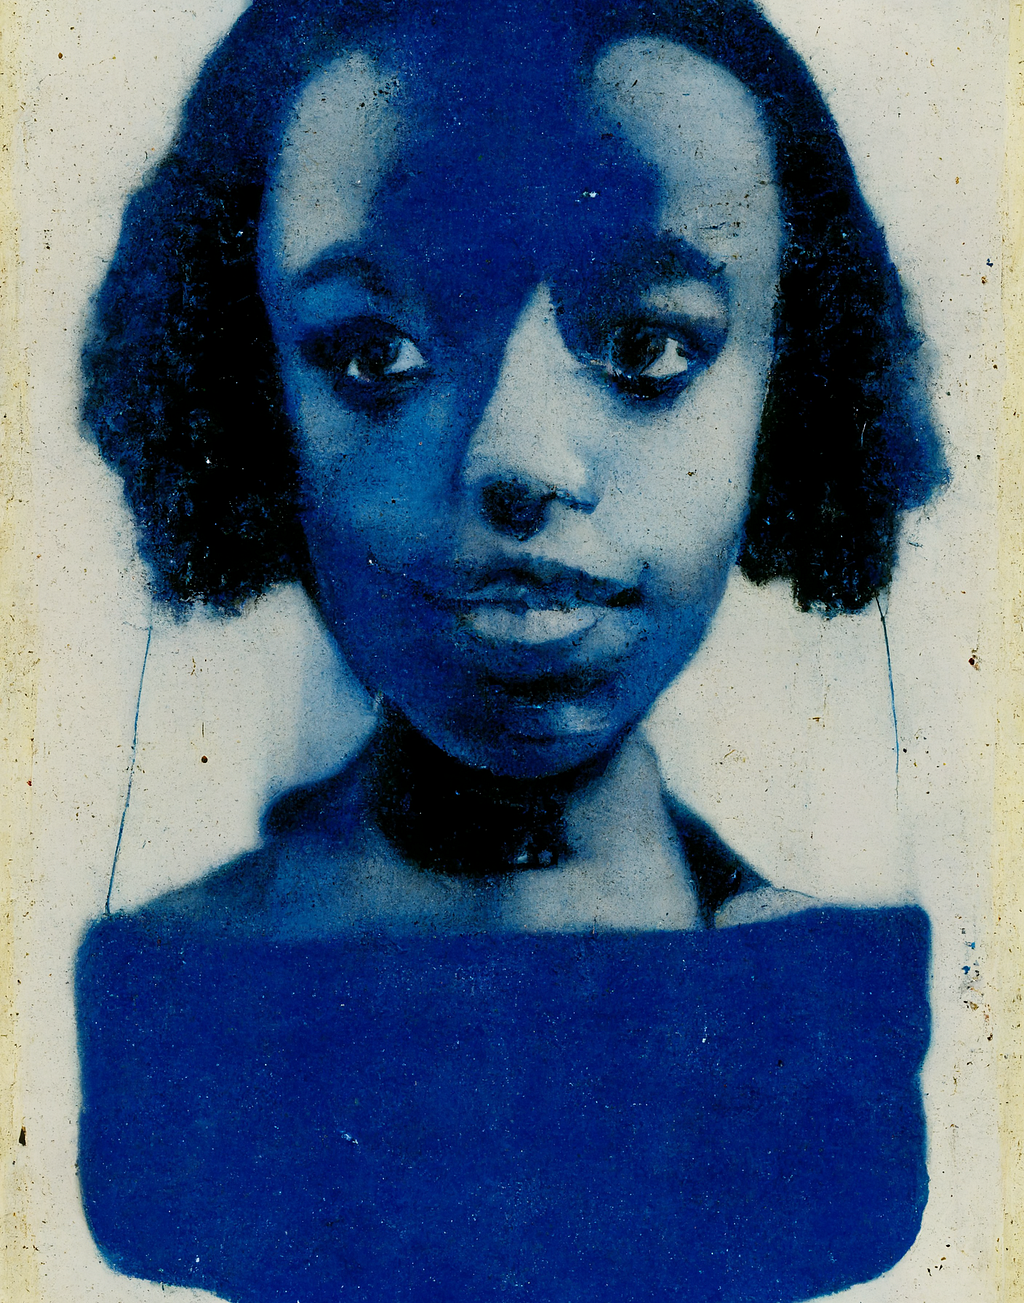 Image of previous work by Minne Atairu, AI-generated portrait of a Black girl